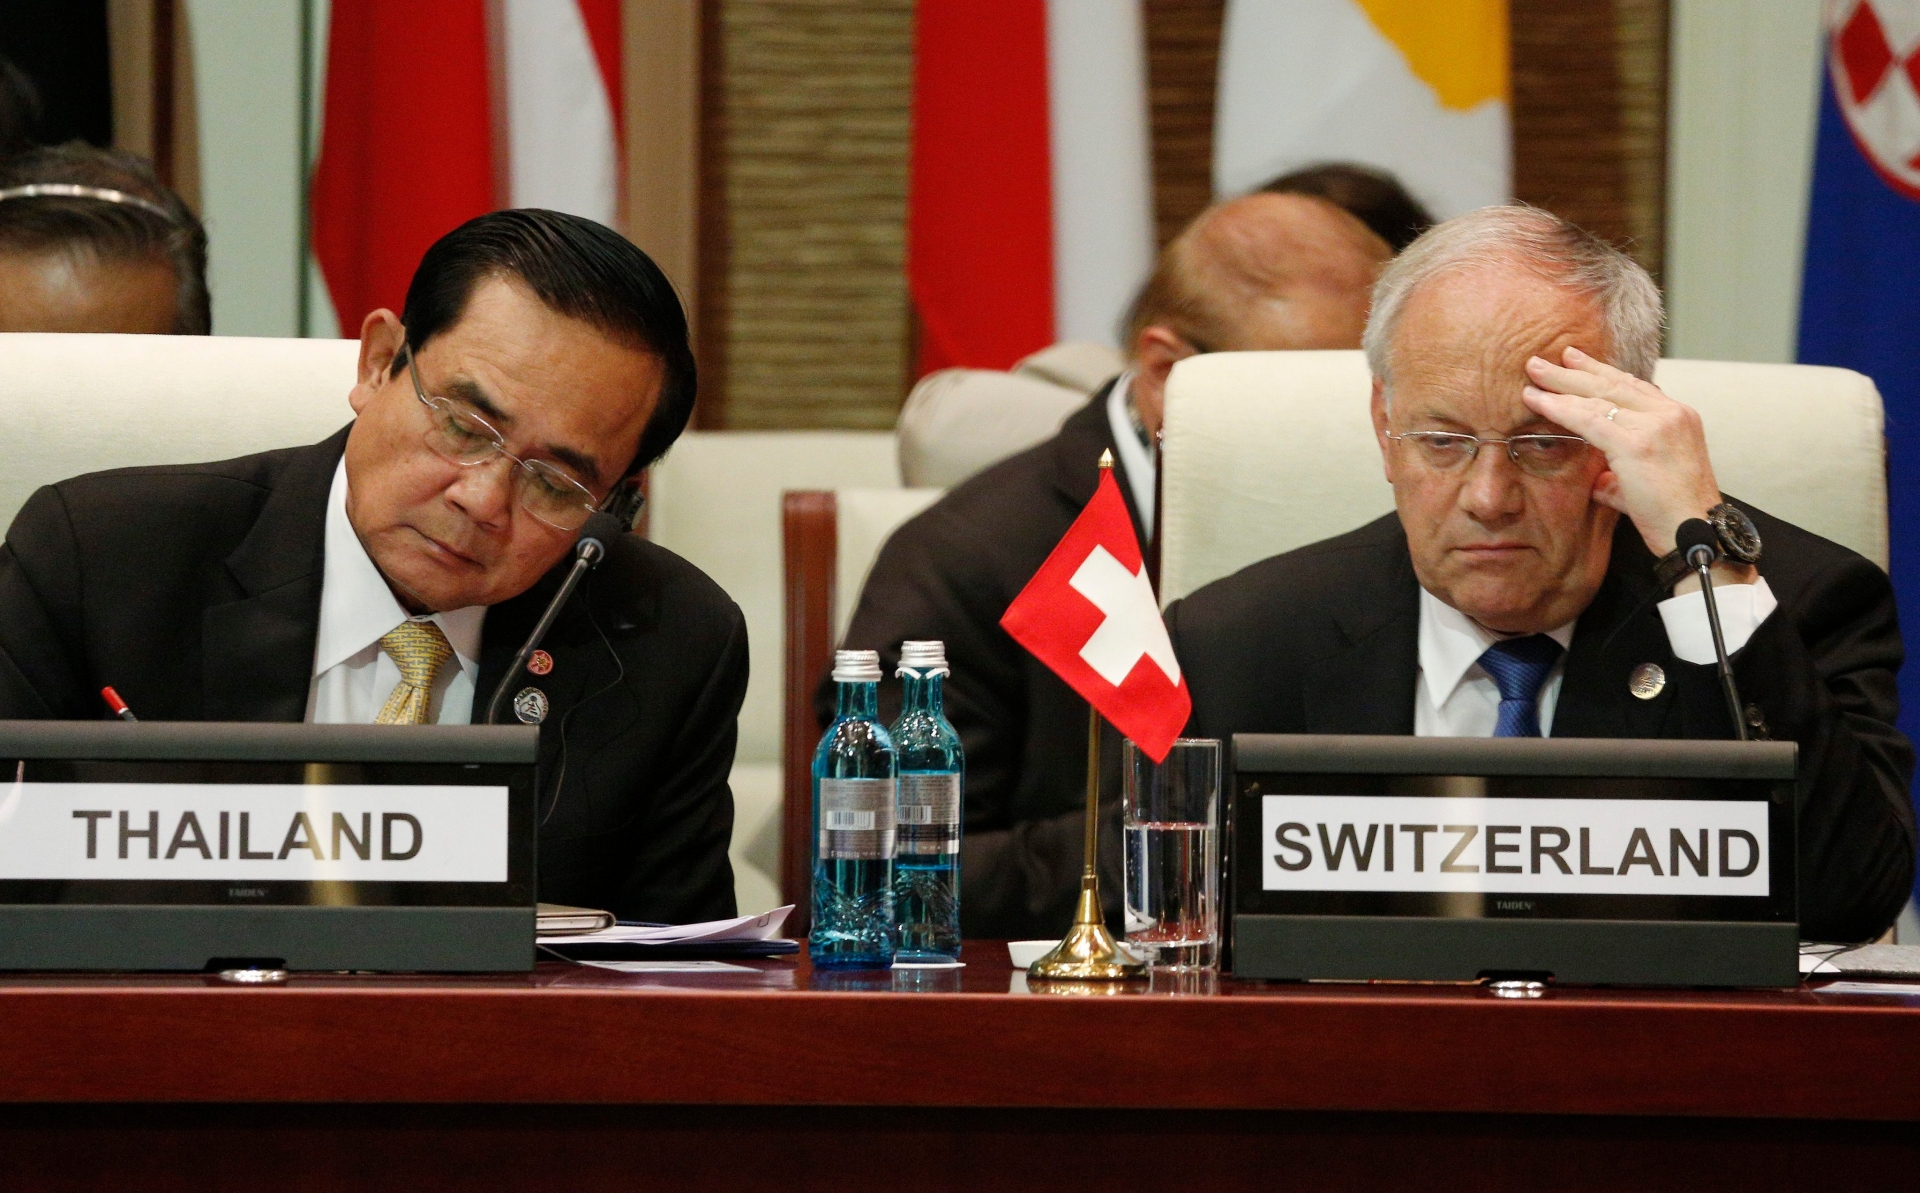 epa05425350 Swiss President Johann Schneider-Ammann (R) and Thai Prime Minister Prayut Chan-o-cha (L) attend the 11th Asia-Europe Meeting (ASEM) Summit of Heads of State and Government (ASEM11) in Ulan Bator, Mongolia, 15 July 2016. Mongolia hosts the 11th ASEM Summit of Heads of State and Government (ASEM11) in its capital city Ulan Bator from 15 to 16 July 2016.  EPA/DAVAANYAM DELGERJARGAL MONGOLIA ASEM SUMMIT